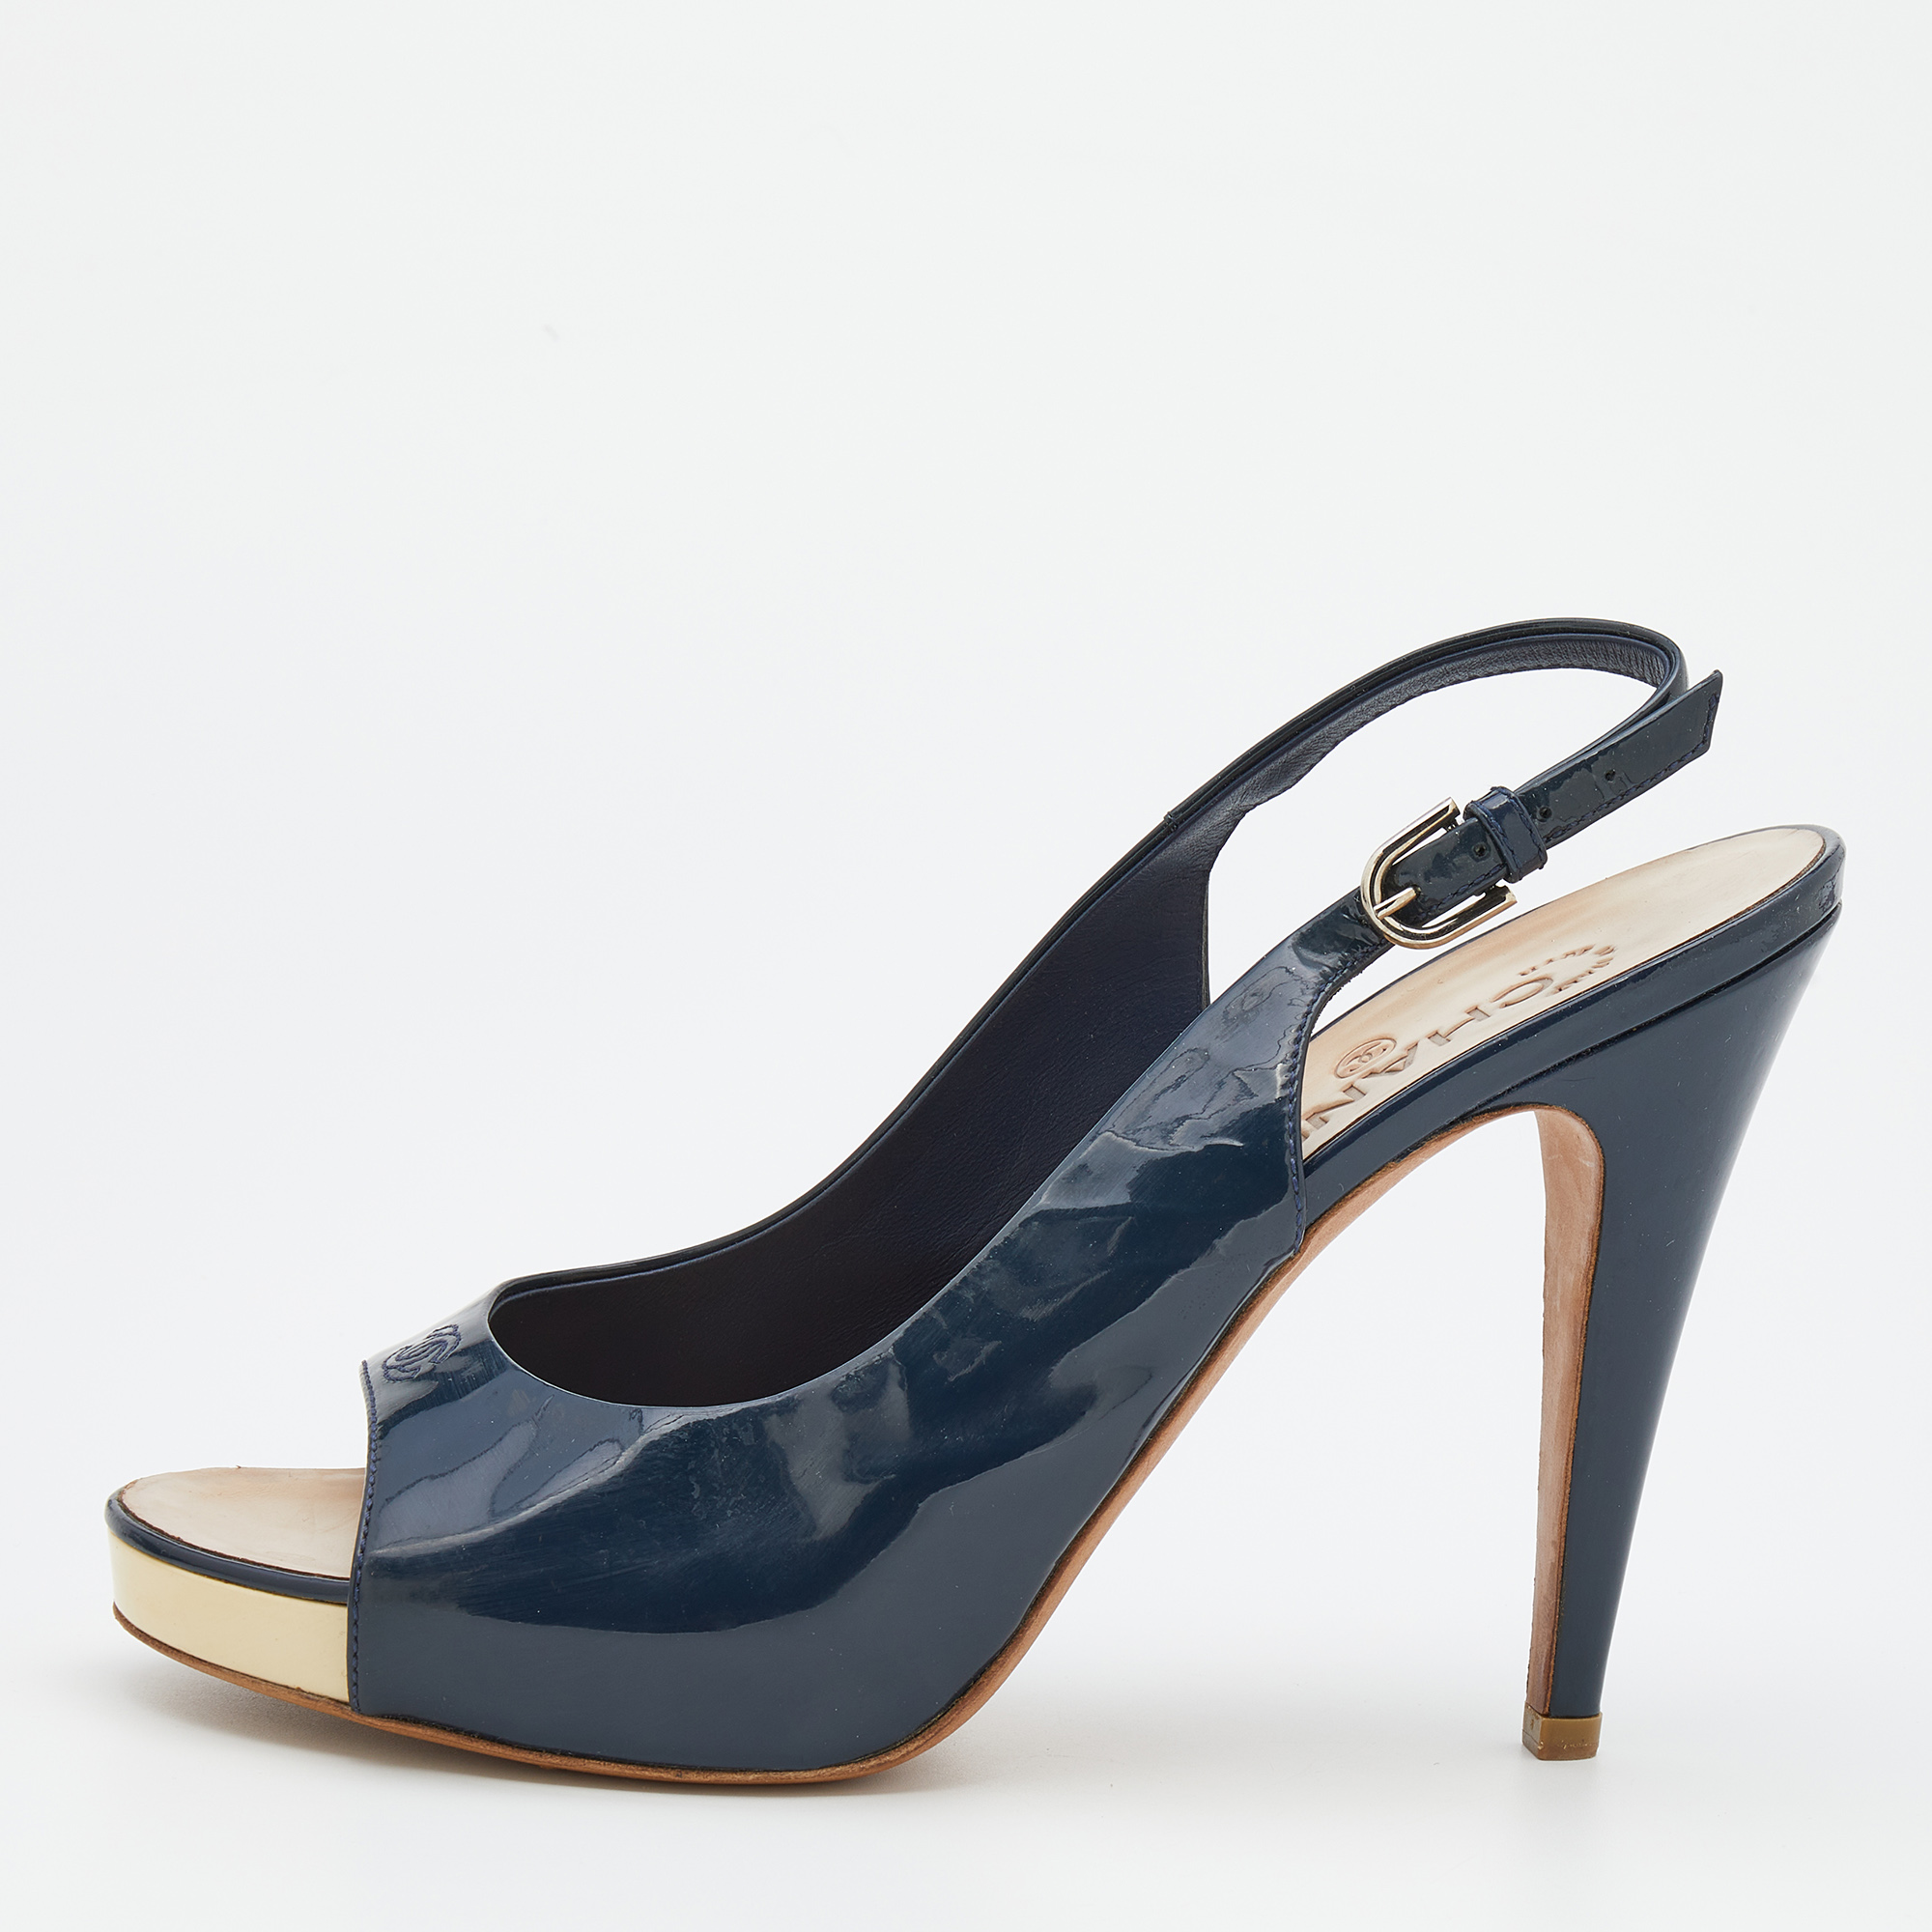 Offering comfort with elegance these Chanel slingback buckled sandals are a wardrobe essential. Crafted in navy blue patent leather the open toe features a platform. The pumps have insole lining that profiles the brands signature and are complete with high heels.